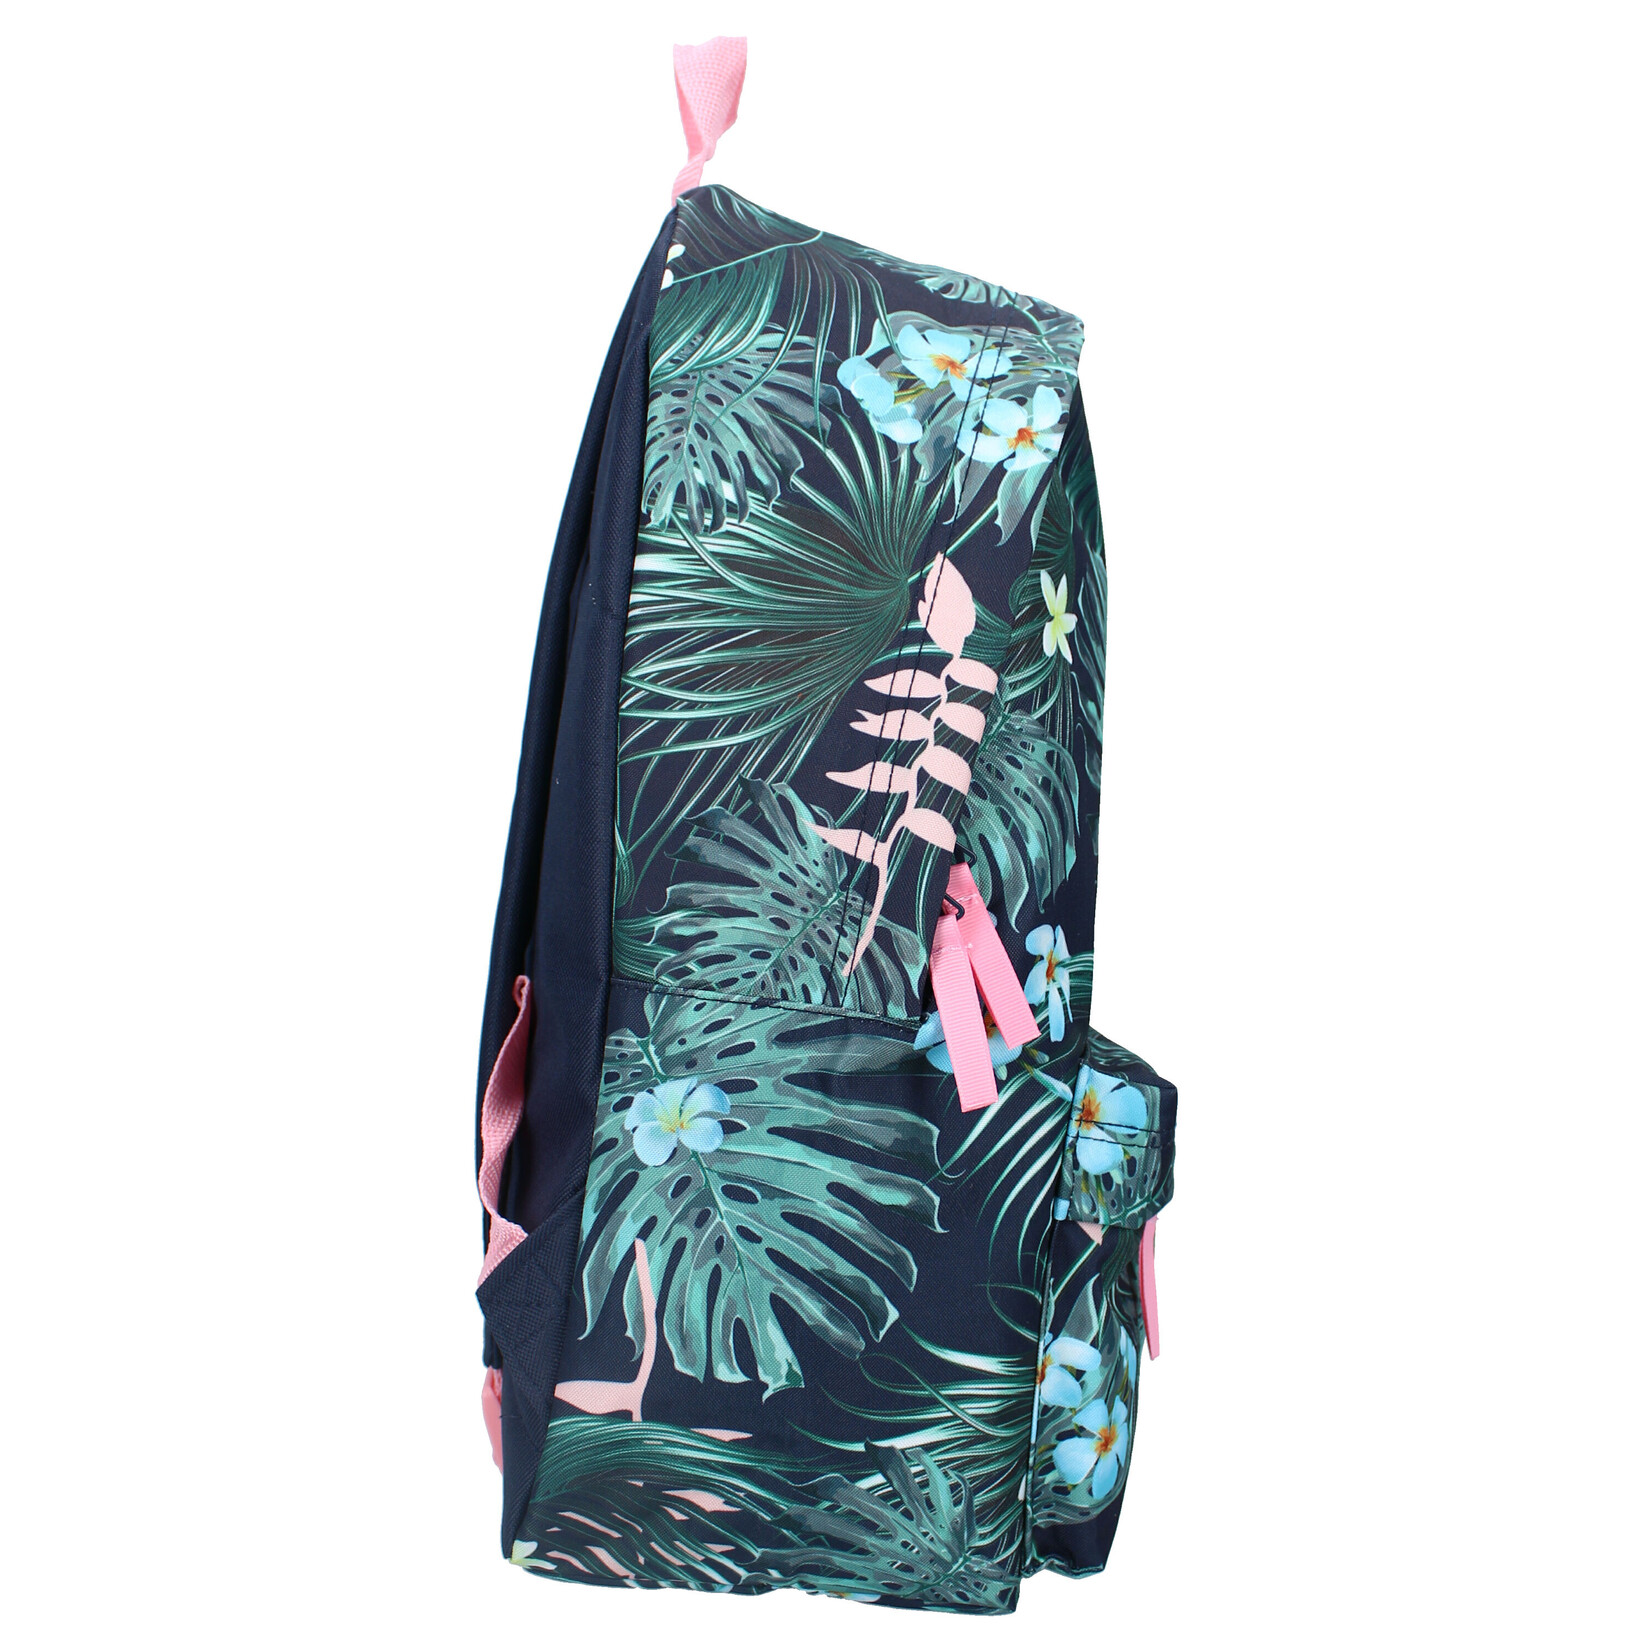 Milky Kiss Rucksack Be Great Limited Edition - Grün